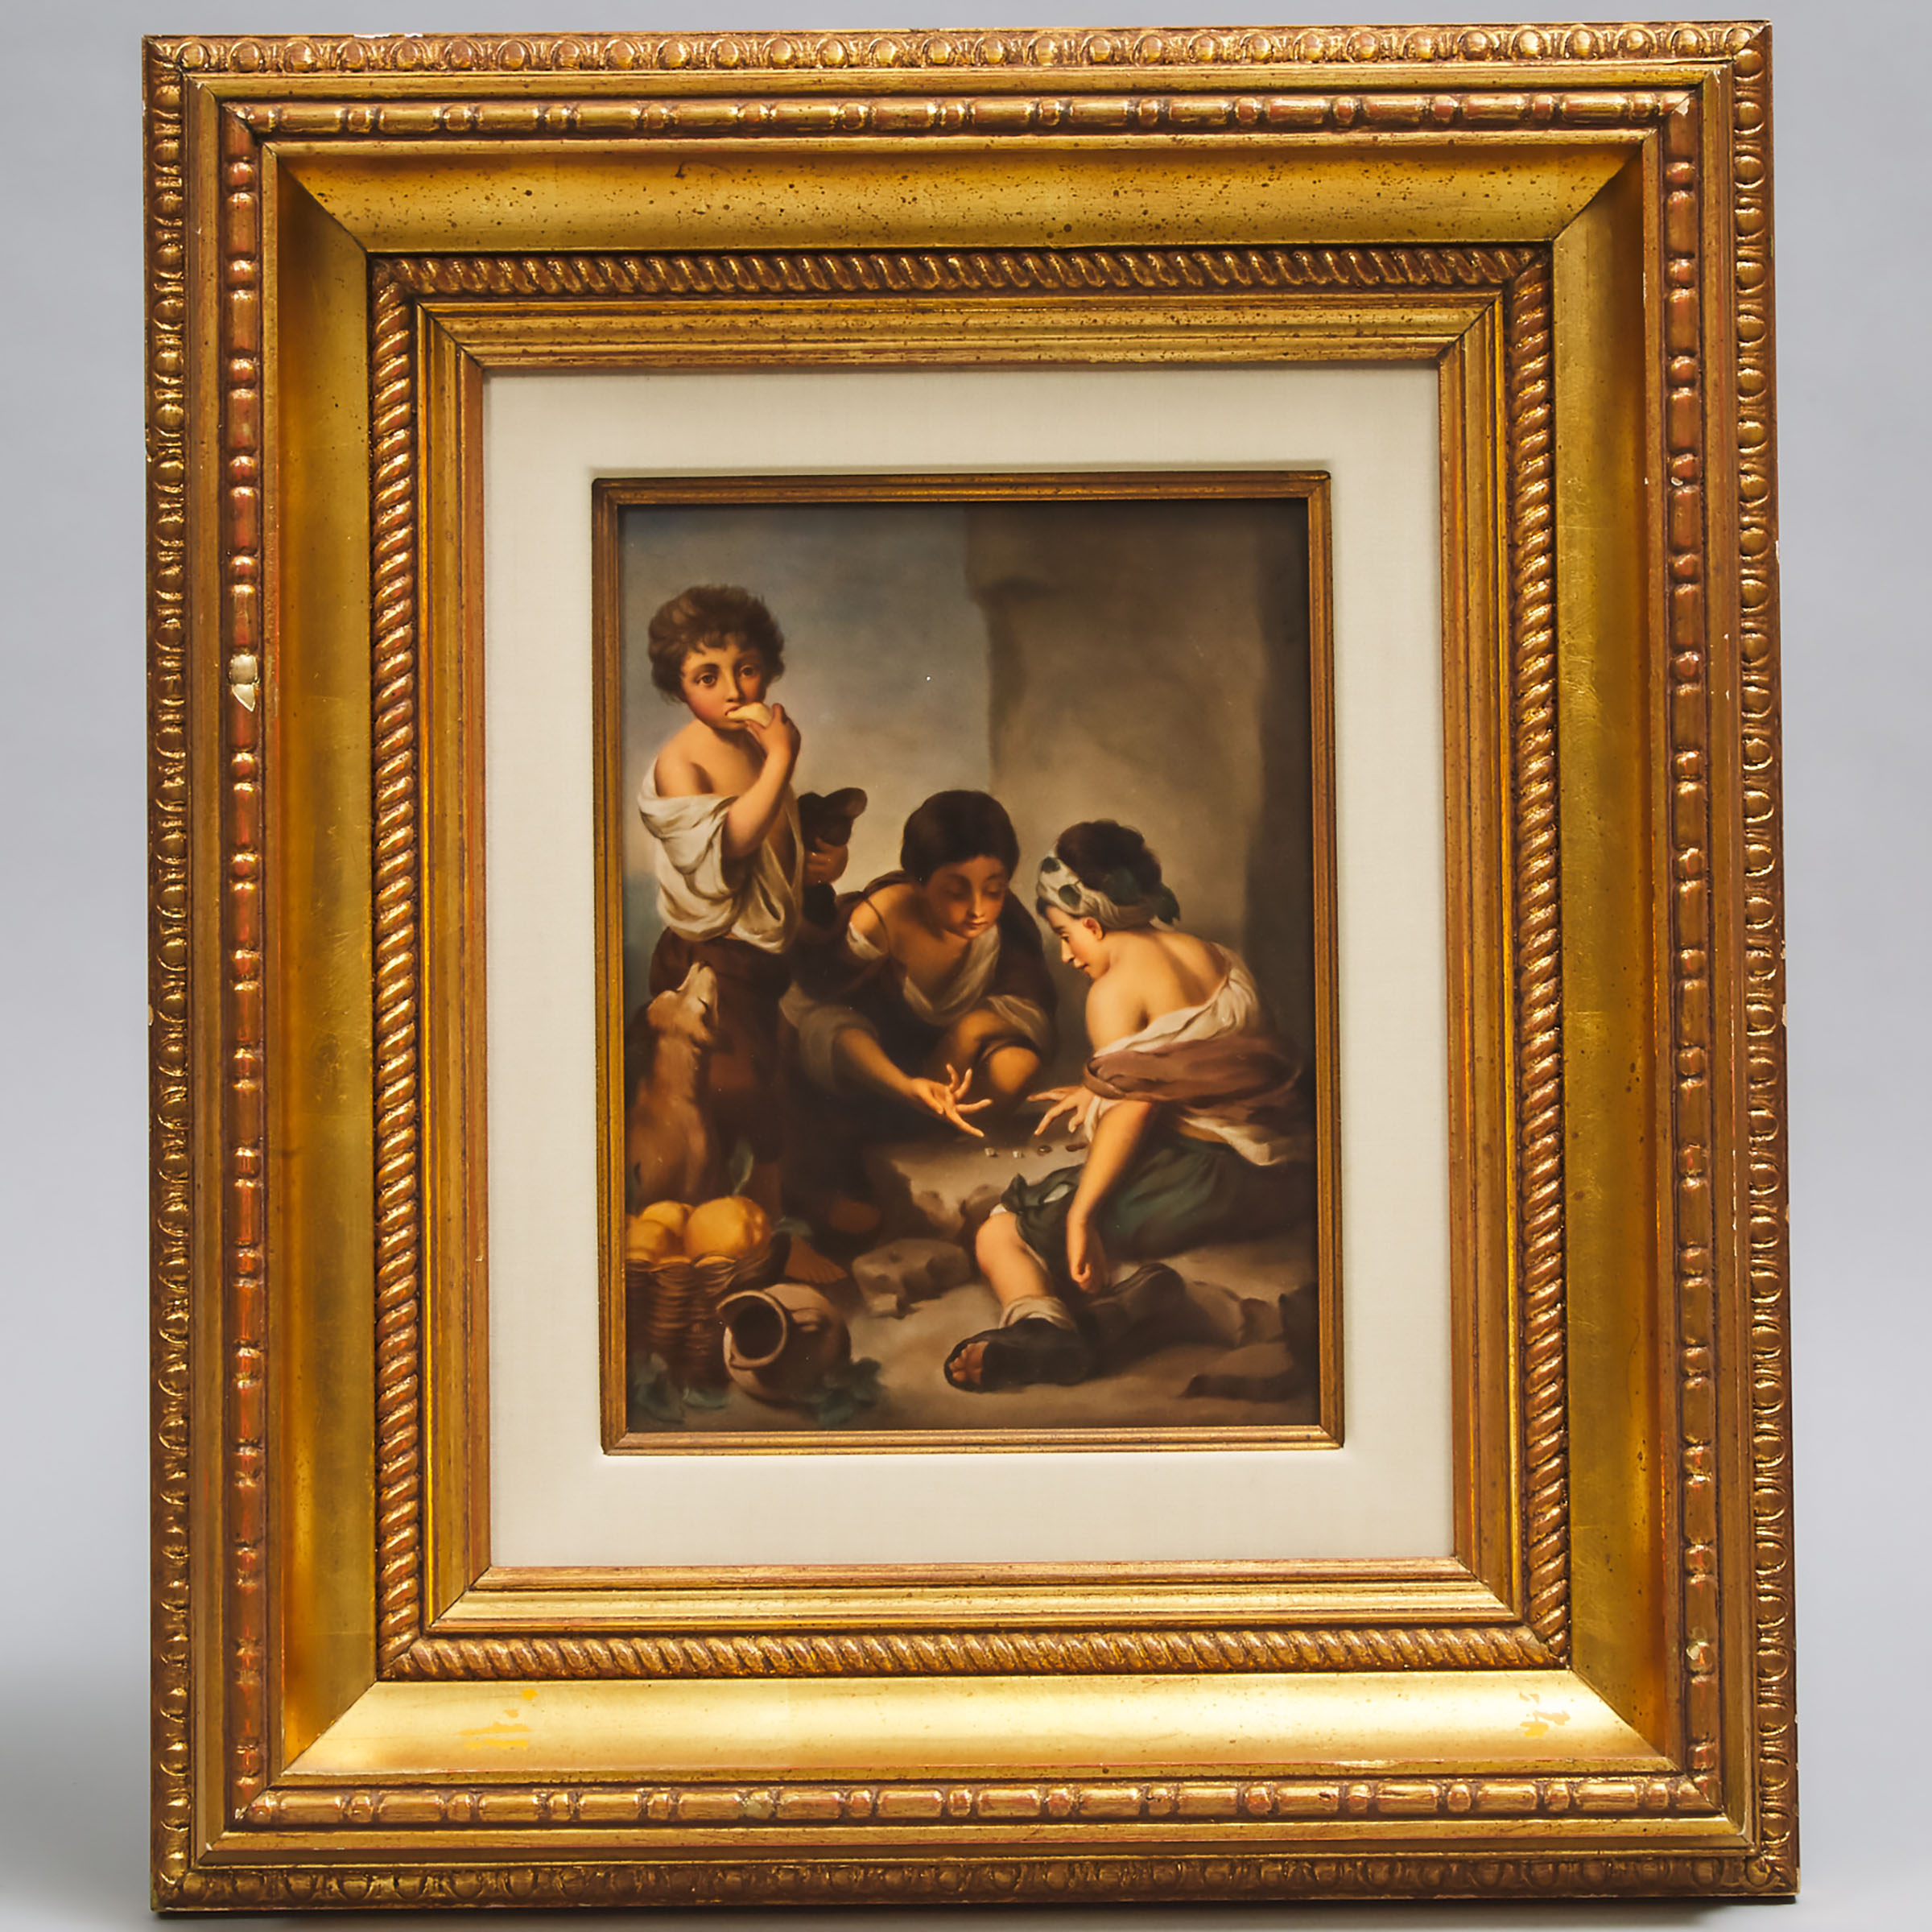 Berlin Rectangular Plaque of 'Children Playing Dice', after Murillo, late 19th century